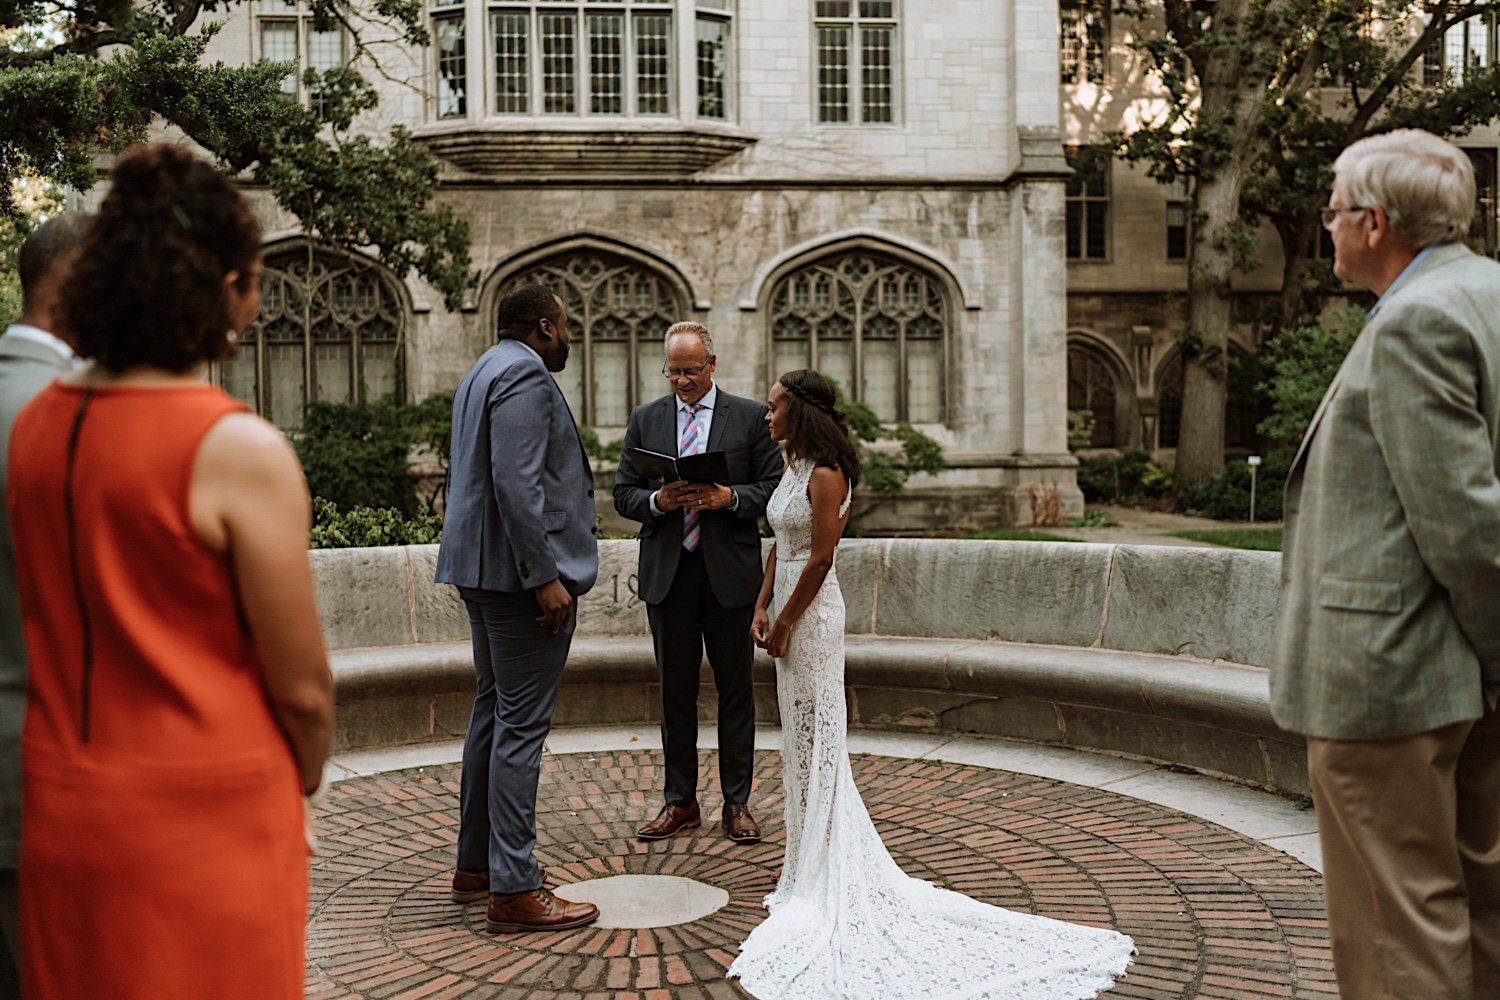 Bride and groom at University of Chicago elopement ceremony